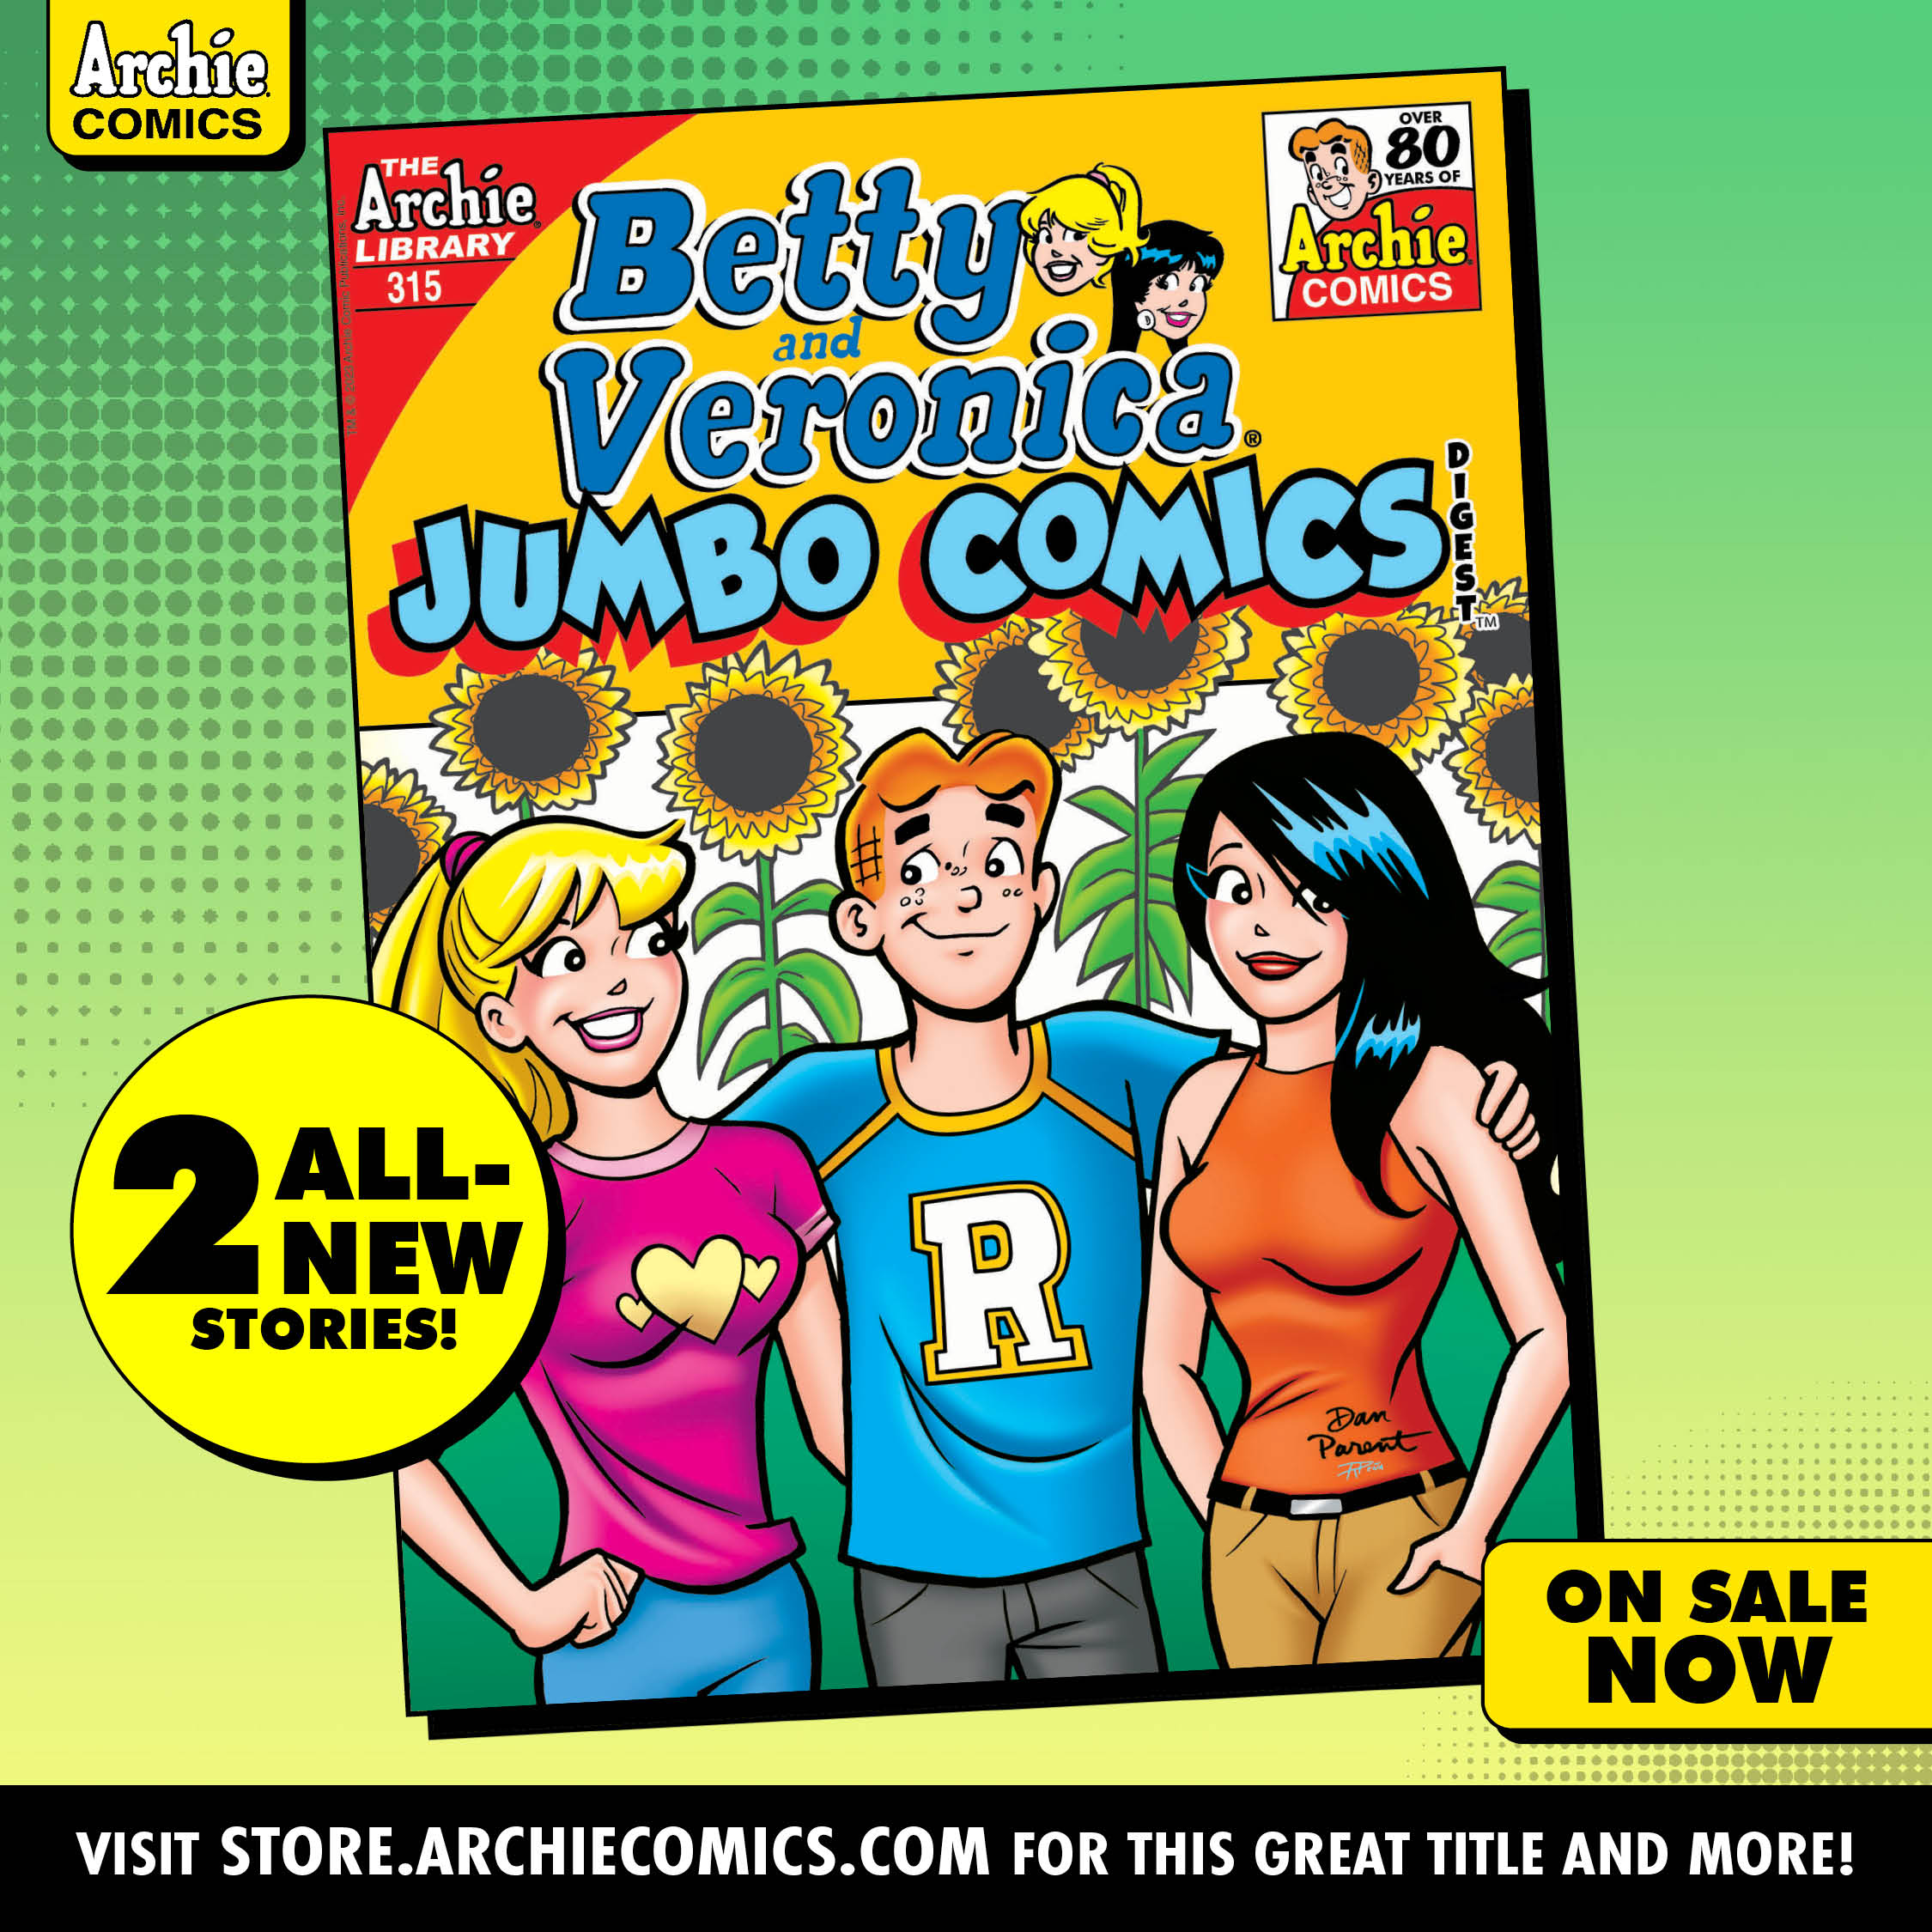 BETTY & VERONICA DIGEST #315 preview